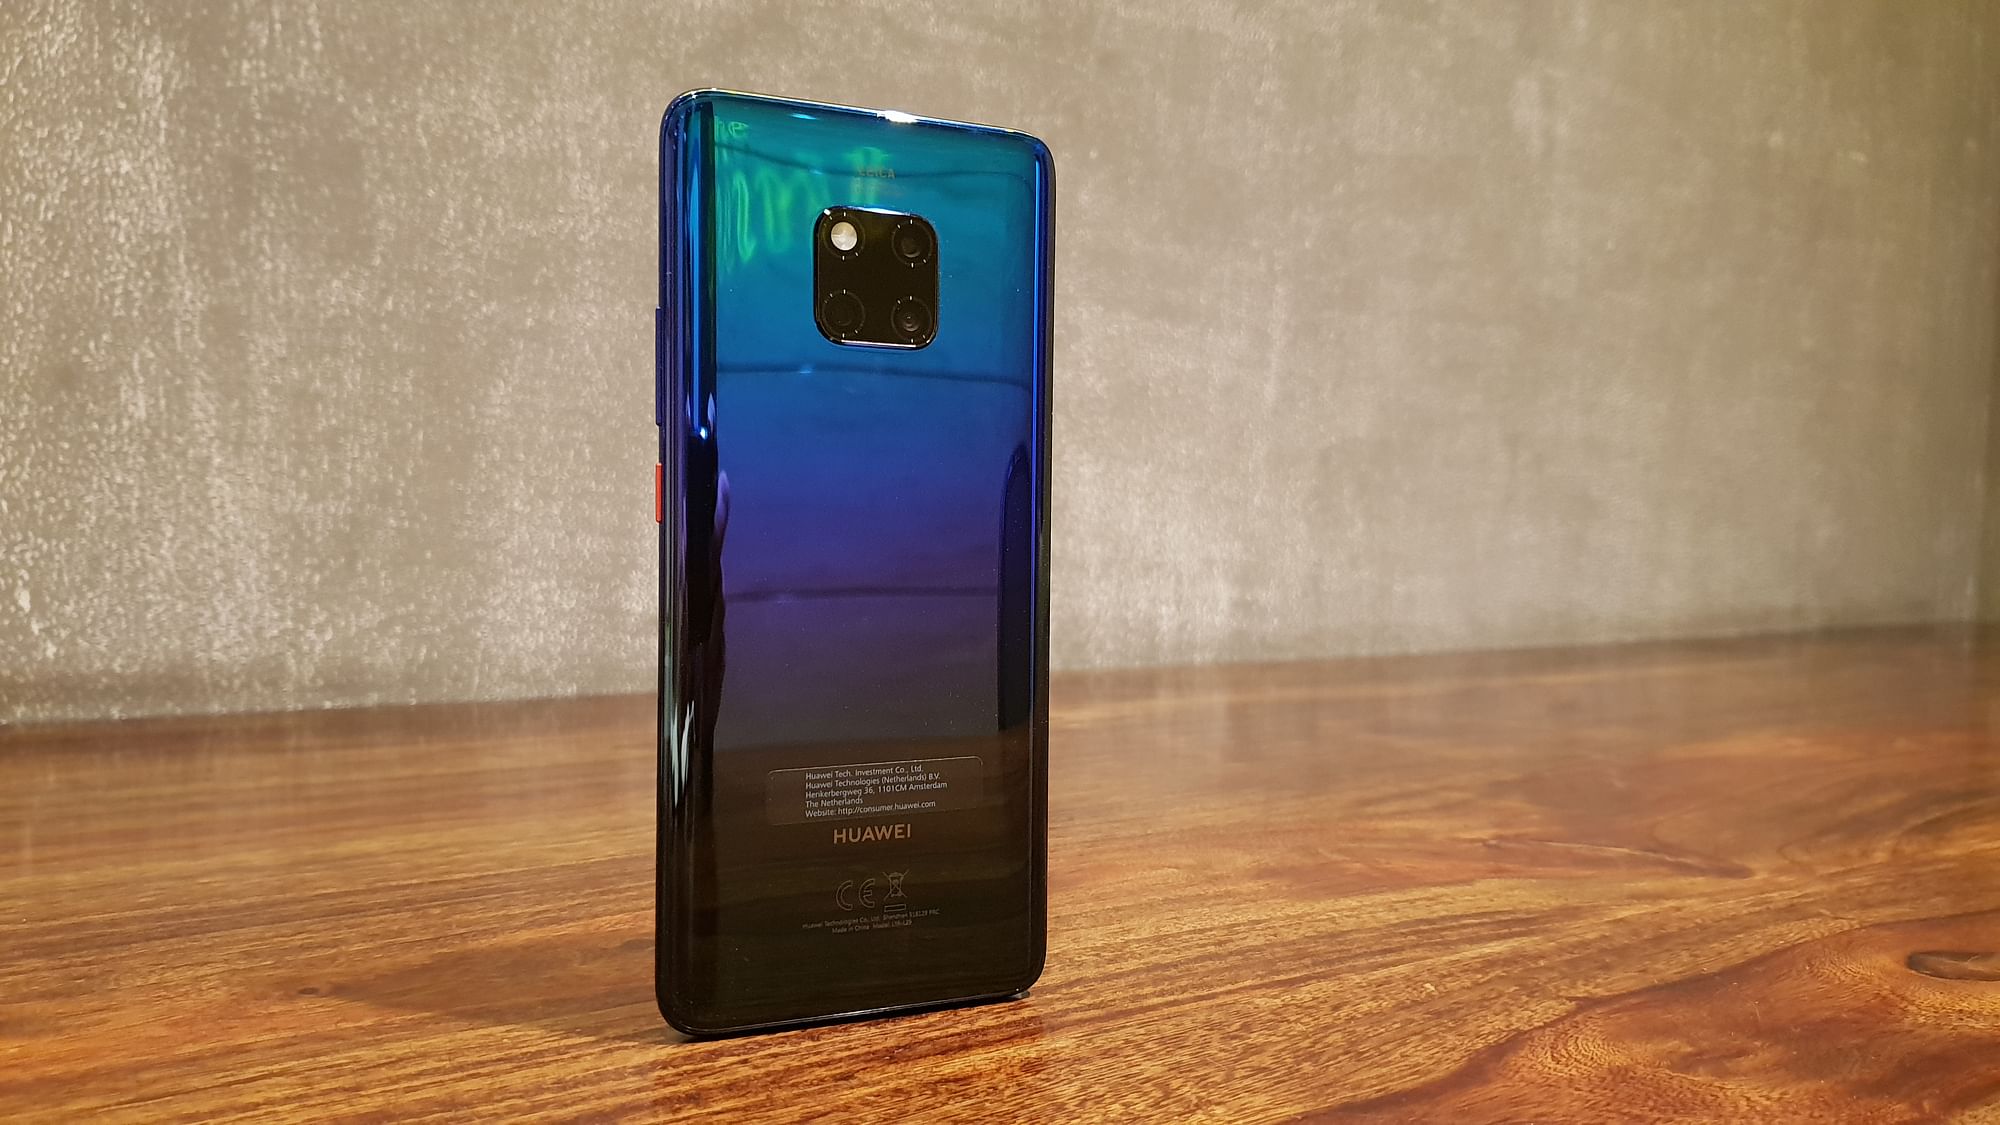 Huawei Mate 20 Pro is a high-end phone.